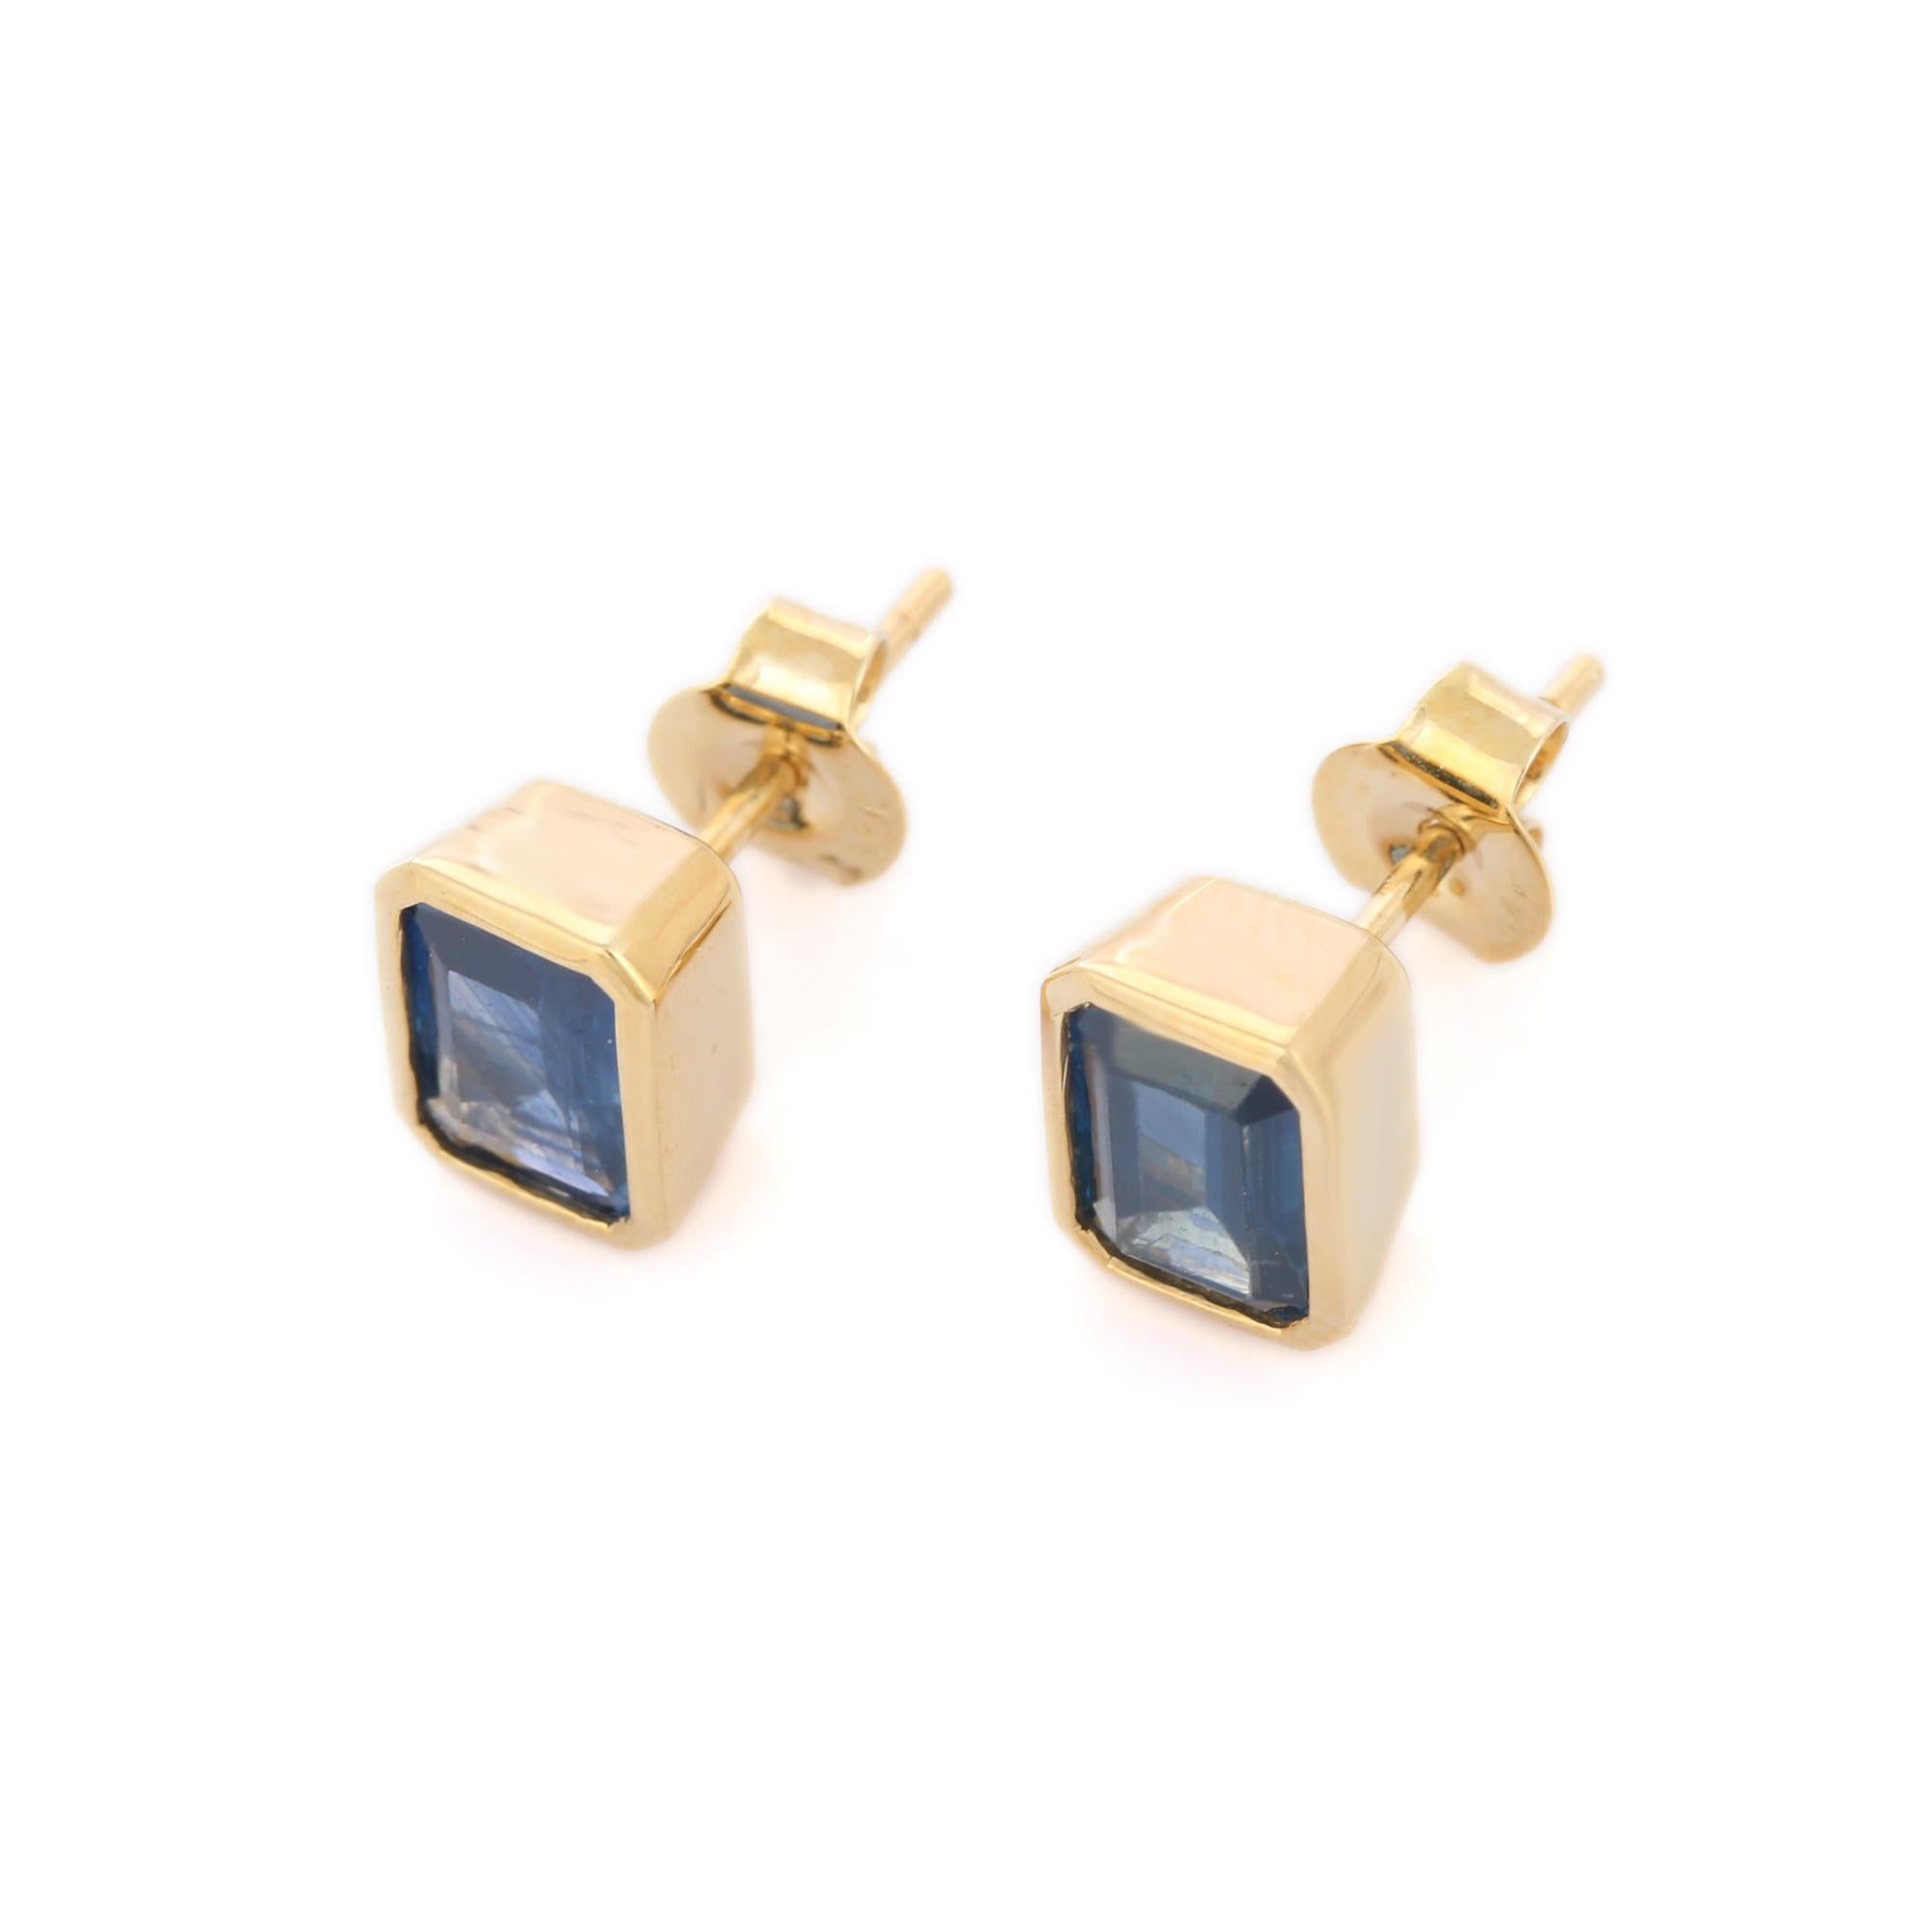 Studs create a subtle beauty while showcasing the colors of the natural precious gemstones  making a statement.

Baguette cut blue sapphire studs in 14K gold. Embrace your look with these stunning pair of earrings suitable for any occasion to